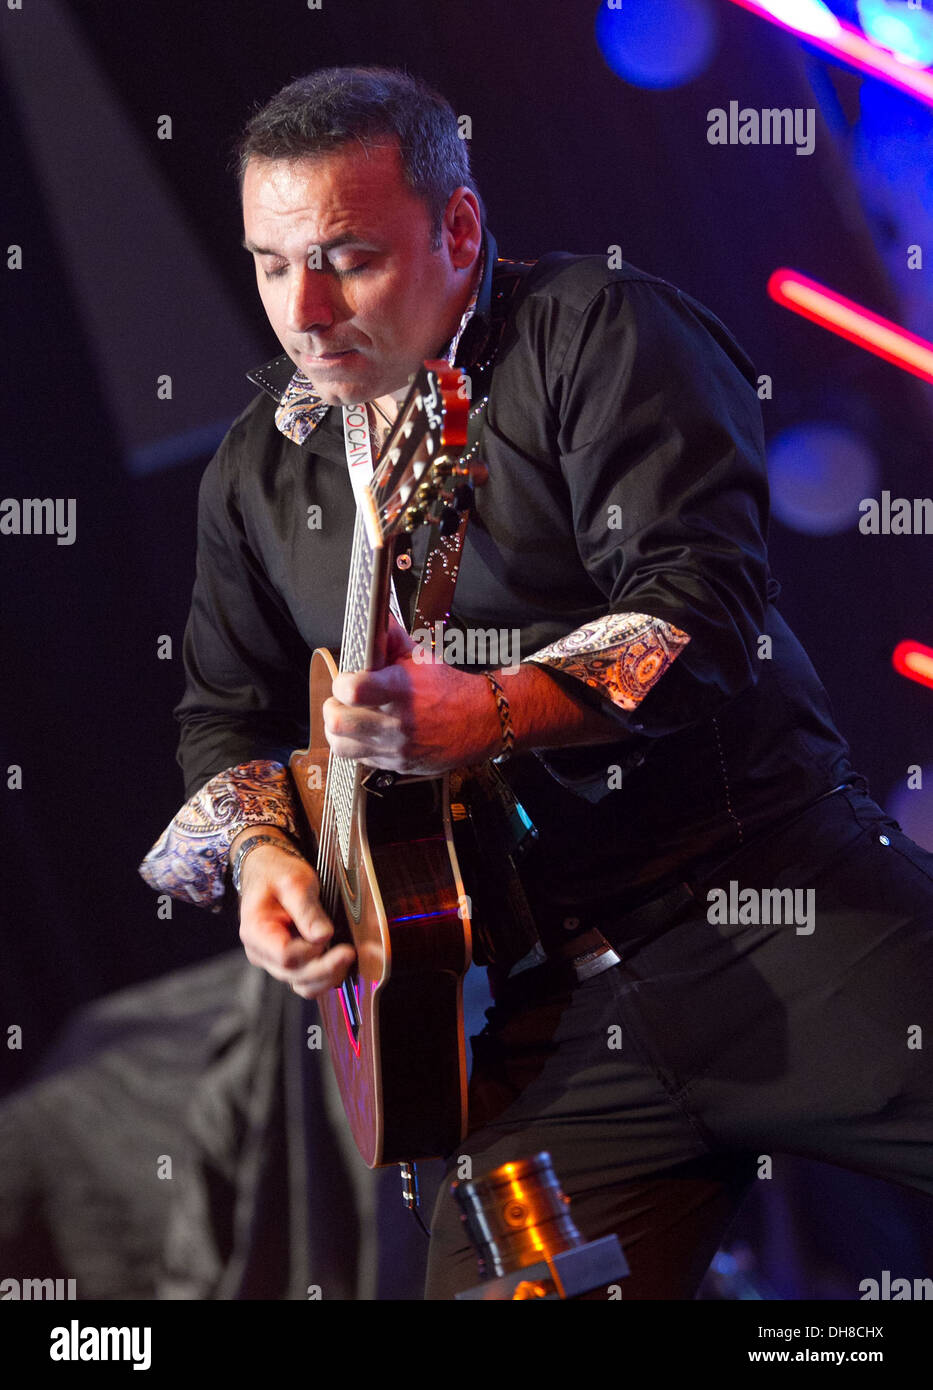 Pavlo performs on stage at 12th Annual Indies Awards during 2012 Slacker Canadian Music Week Toronto Canada - 24.03.12 Stock Photo